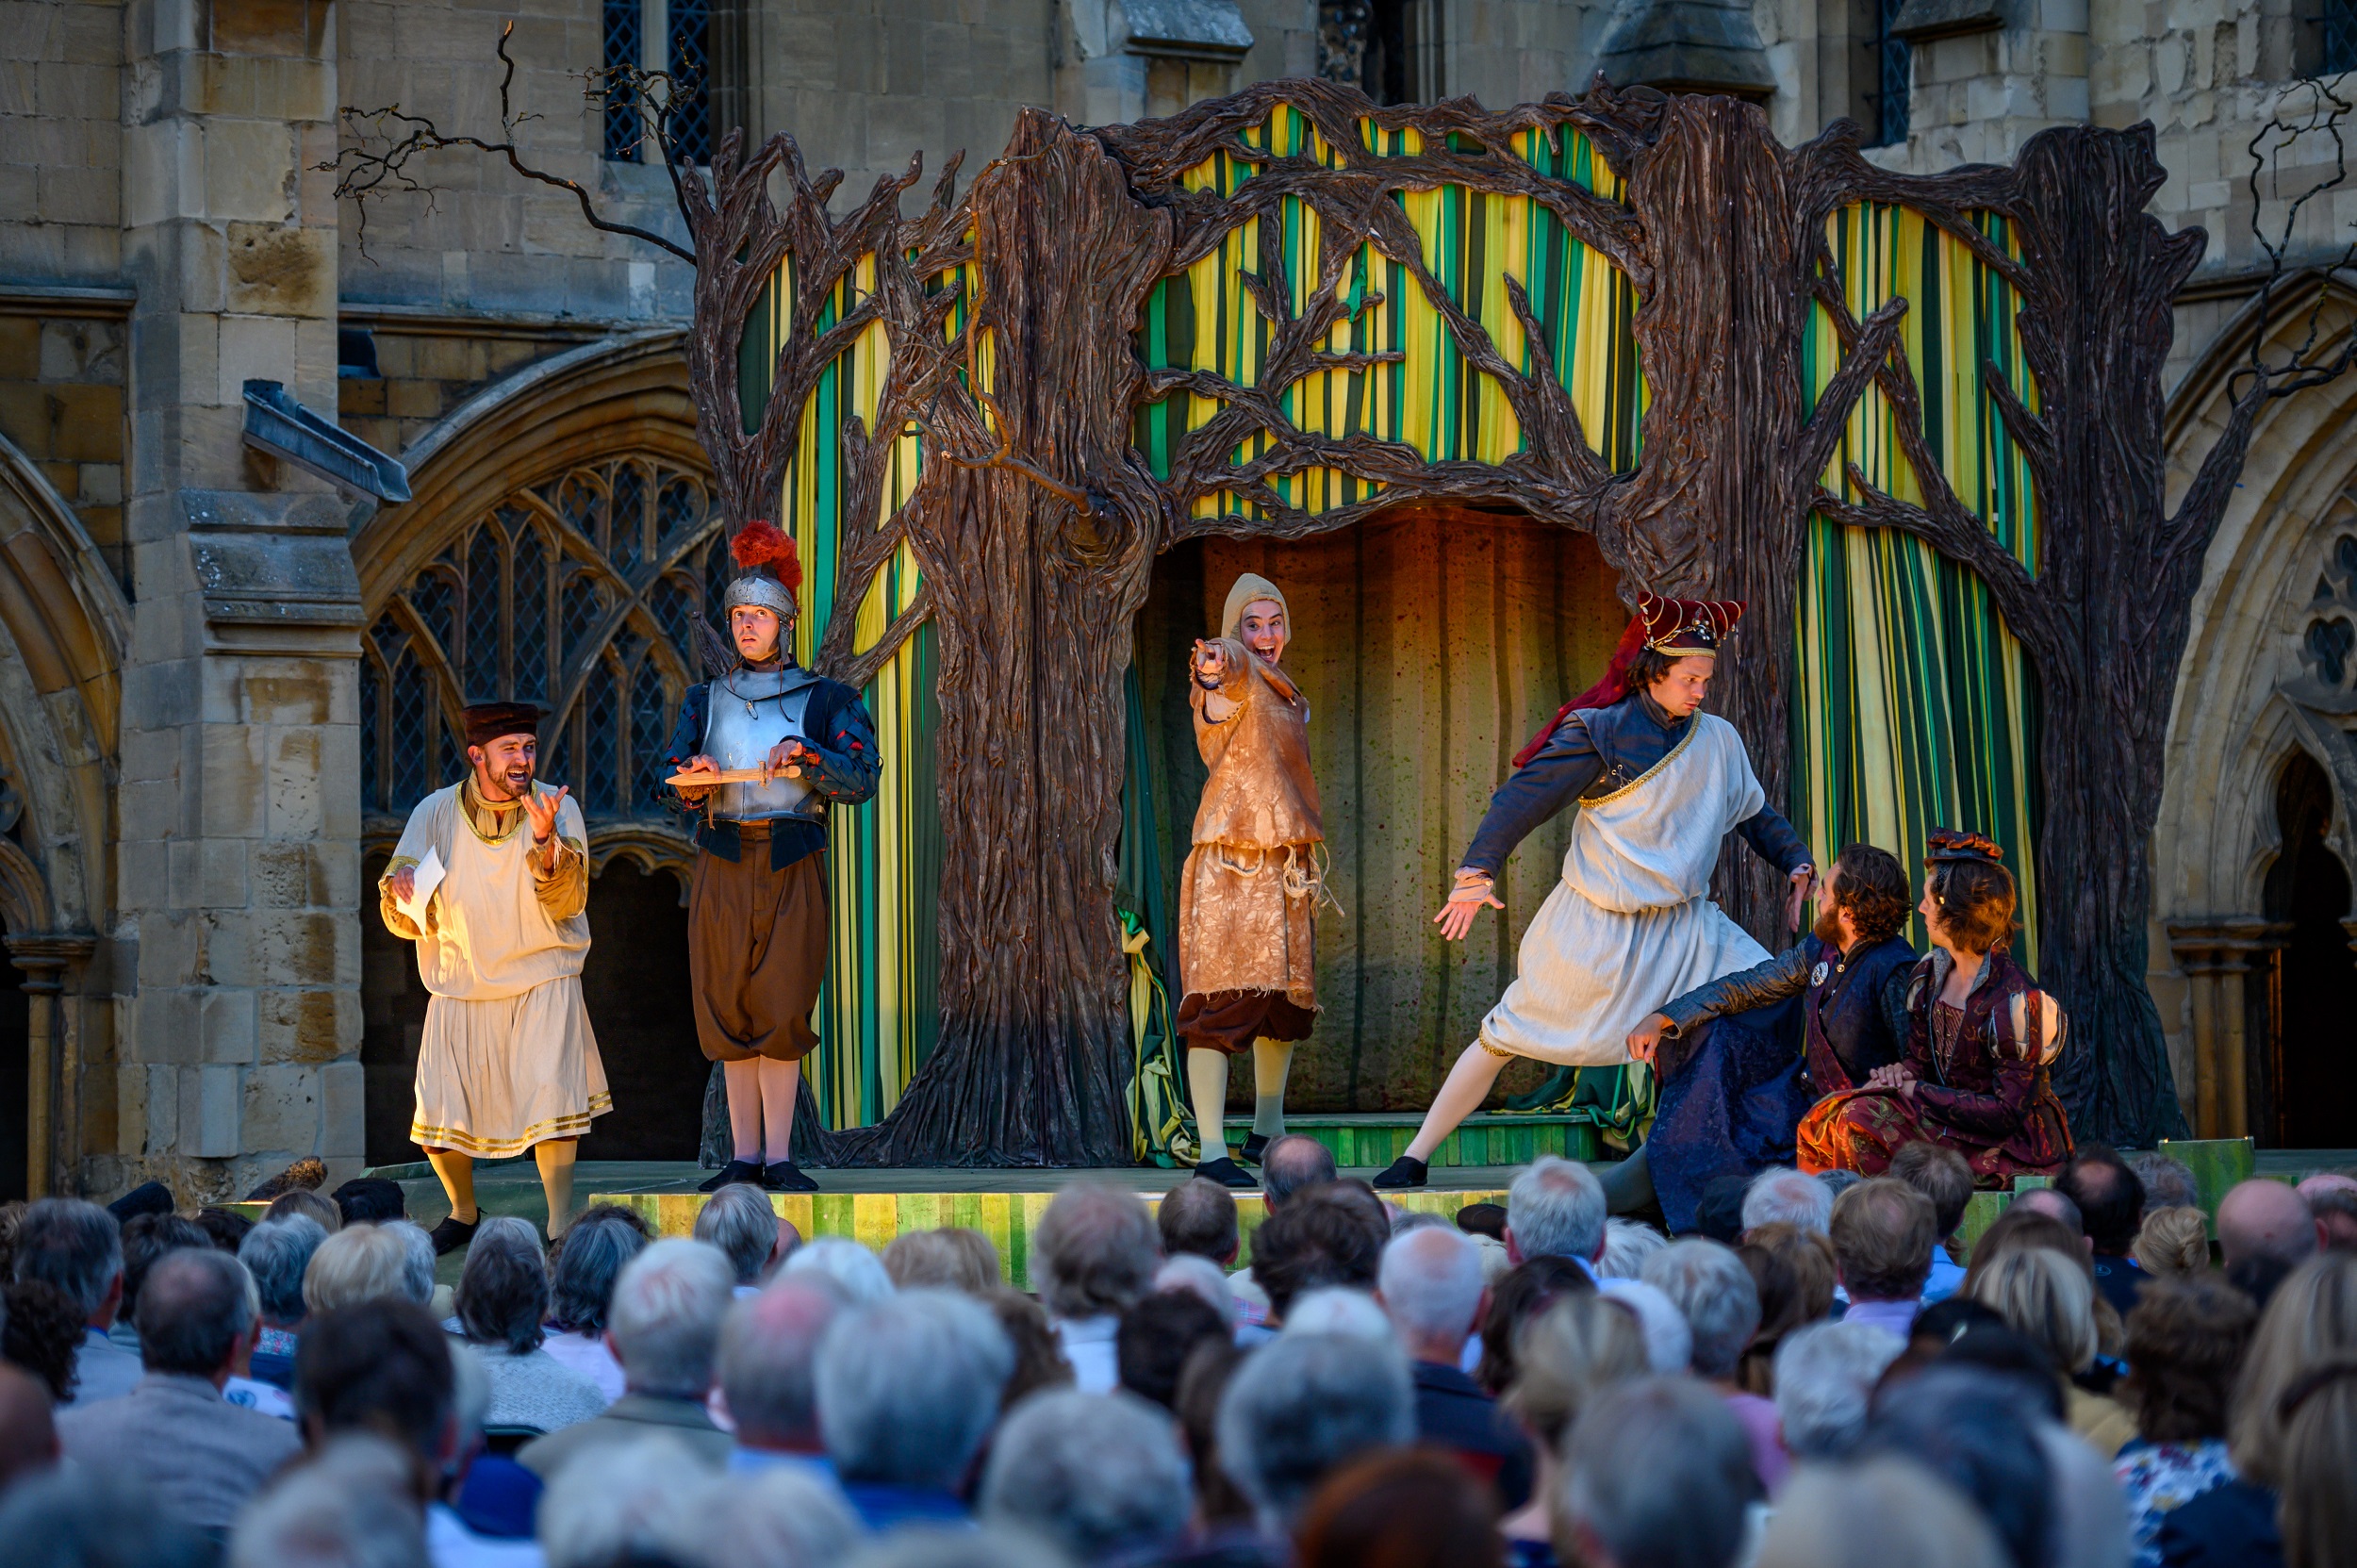 Shakespeare Festival at Norwich Cathedral. 'A Midsummer Night's Dream' presented by The Lord Chamberlain's Men. Photograph: Norwich Cathedral / Bill Smith